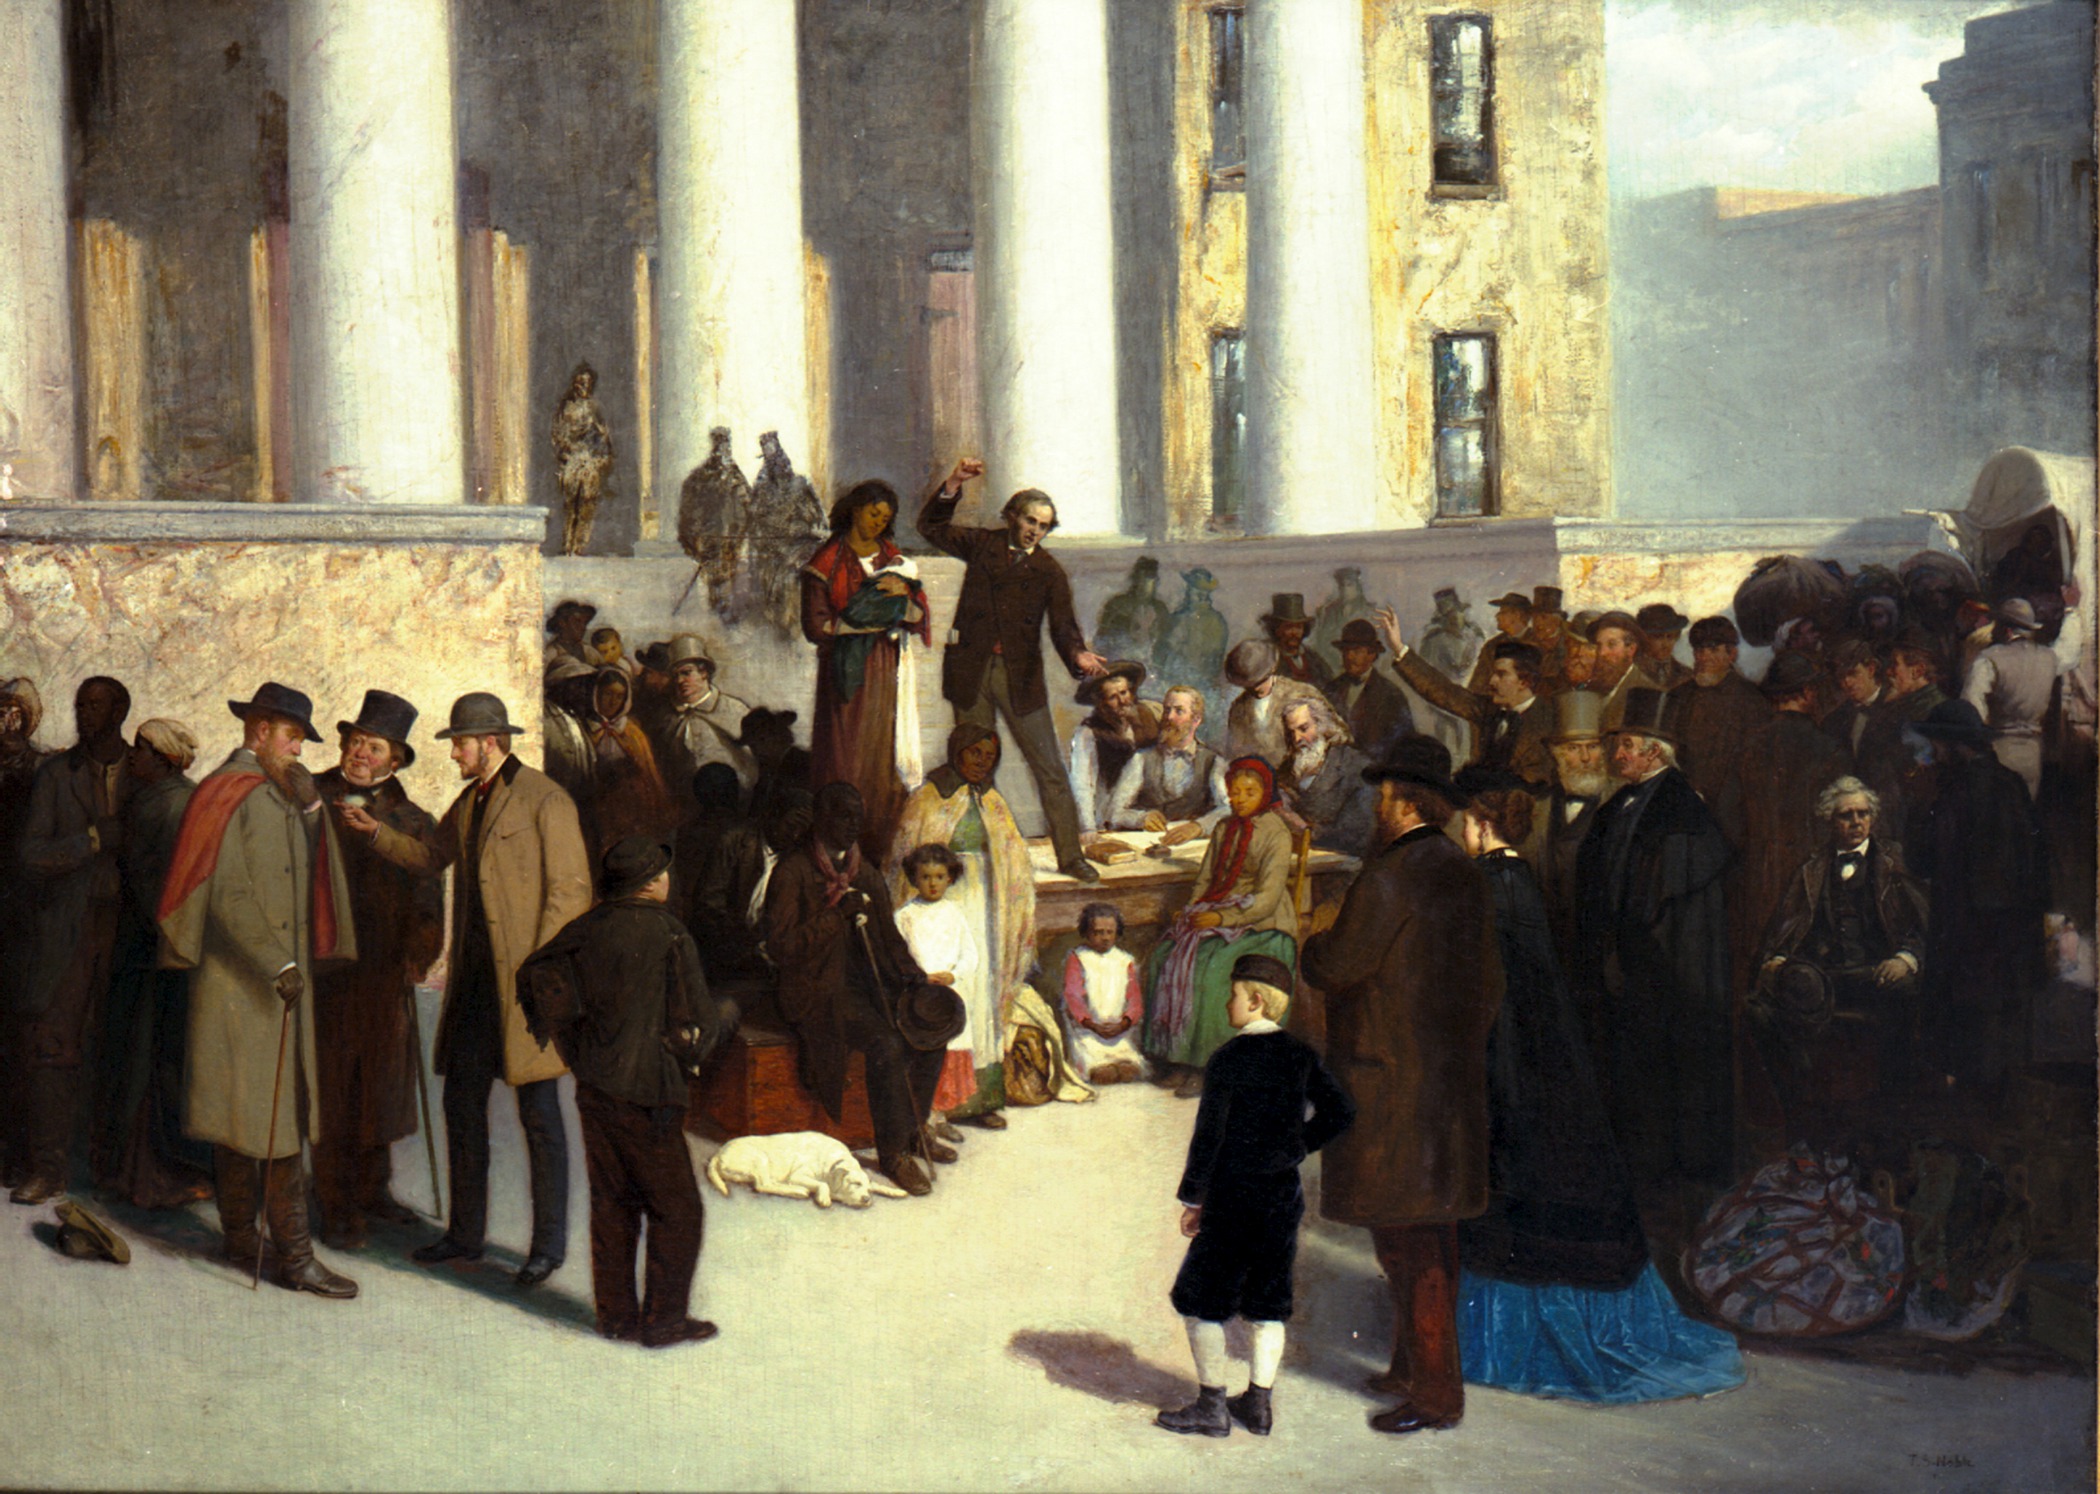 Oil painting titled 'The Last Sale of Slaves' by Thomas Satterwhite Noble. A crowd of people are gathered in front of the St. Louis Court House steps. Everyone is wearing winter clothing. The light in the painting is focused on a quartet of enslaved African-Americans, one of whom may be of mixed racial lineage. Everyone else in the painting is white and watching the auction of people.